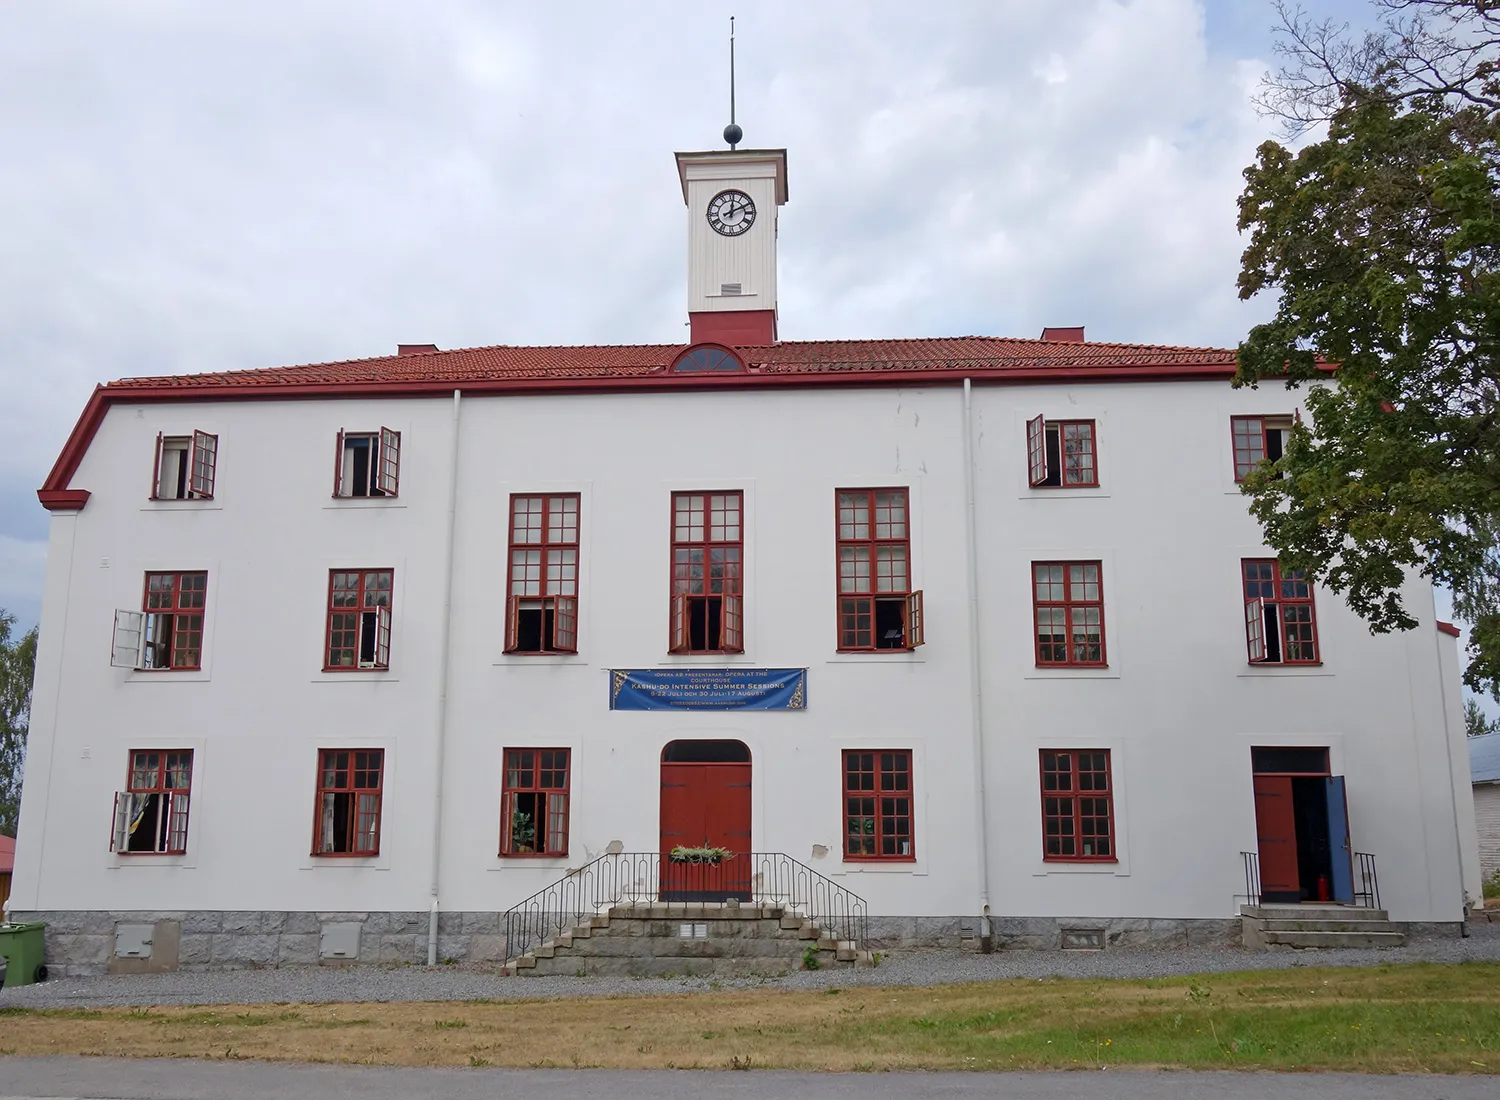 Photo showing: The old courthouse in Nyland, Kramfors Municipality, Sweden.